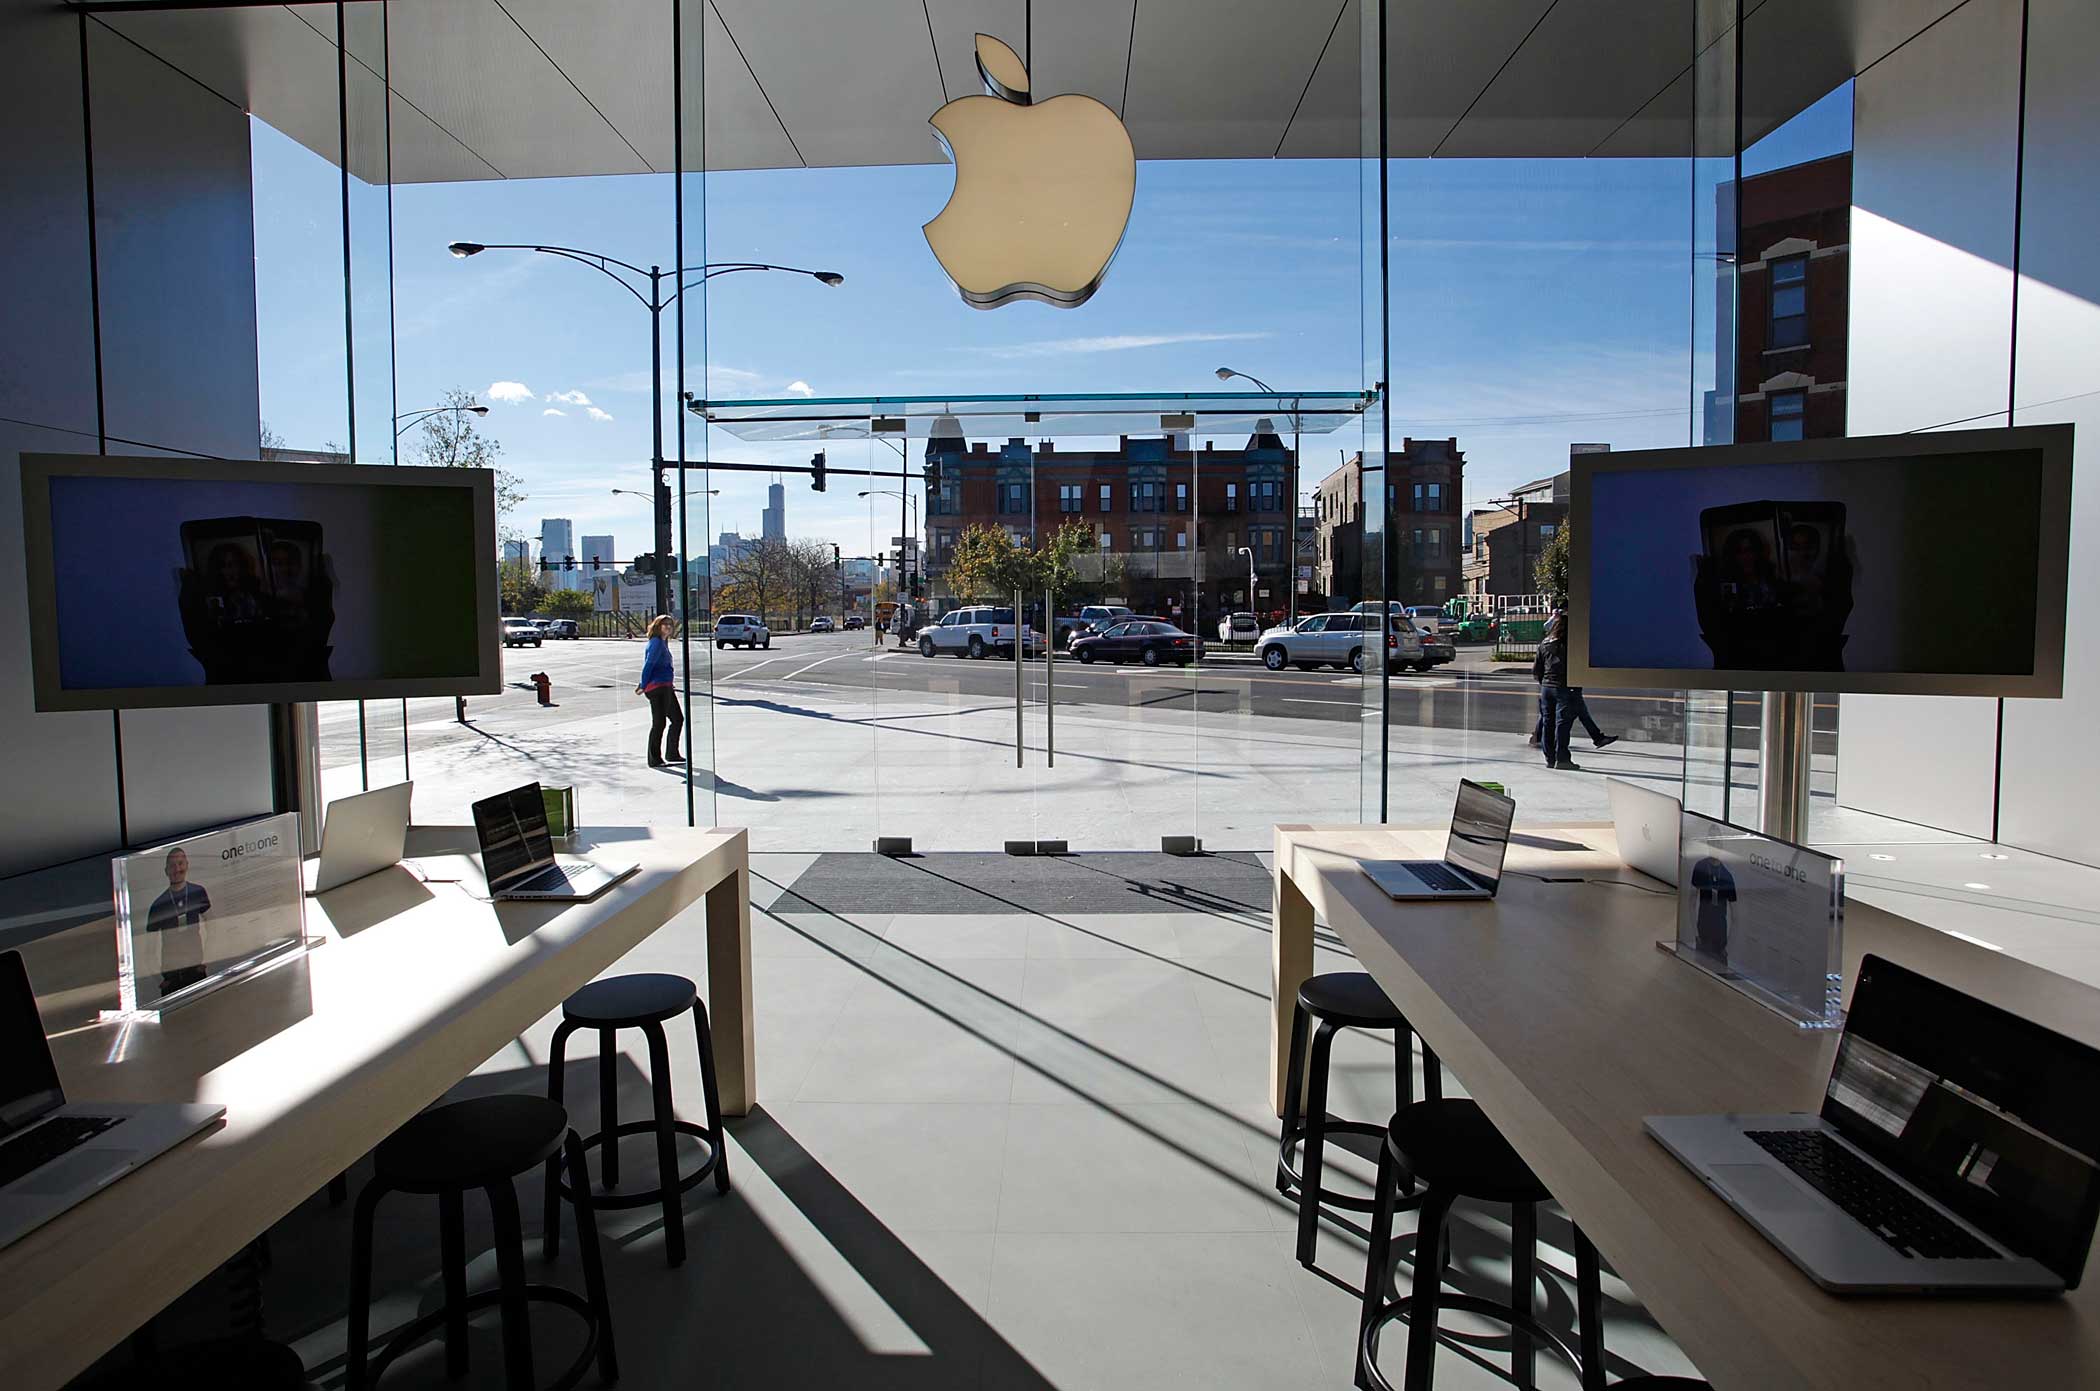 Apple Opens New Store In Chicago's Lincoln Park Neighborhood